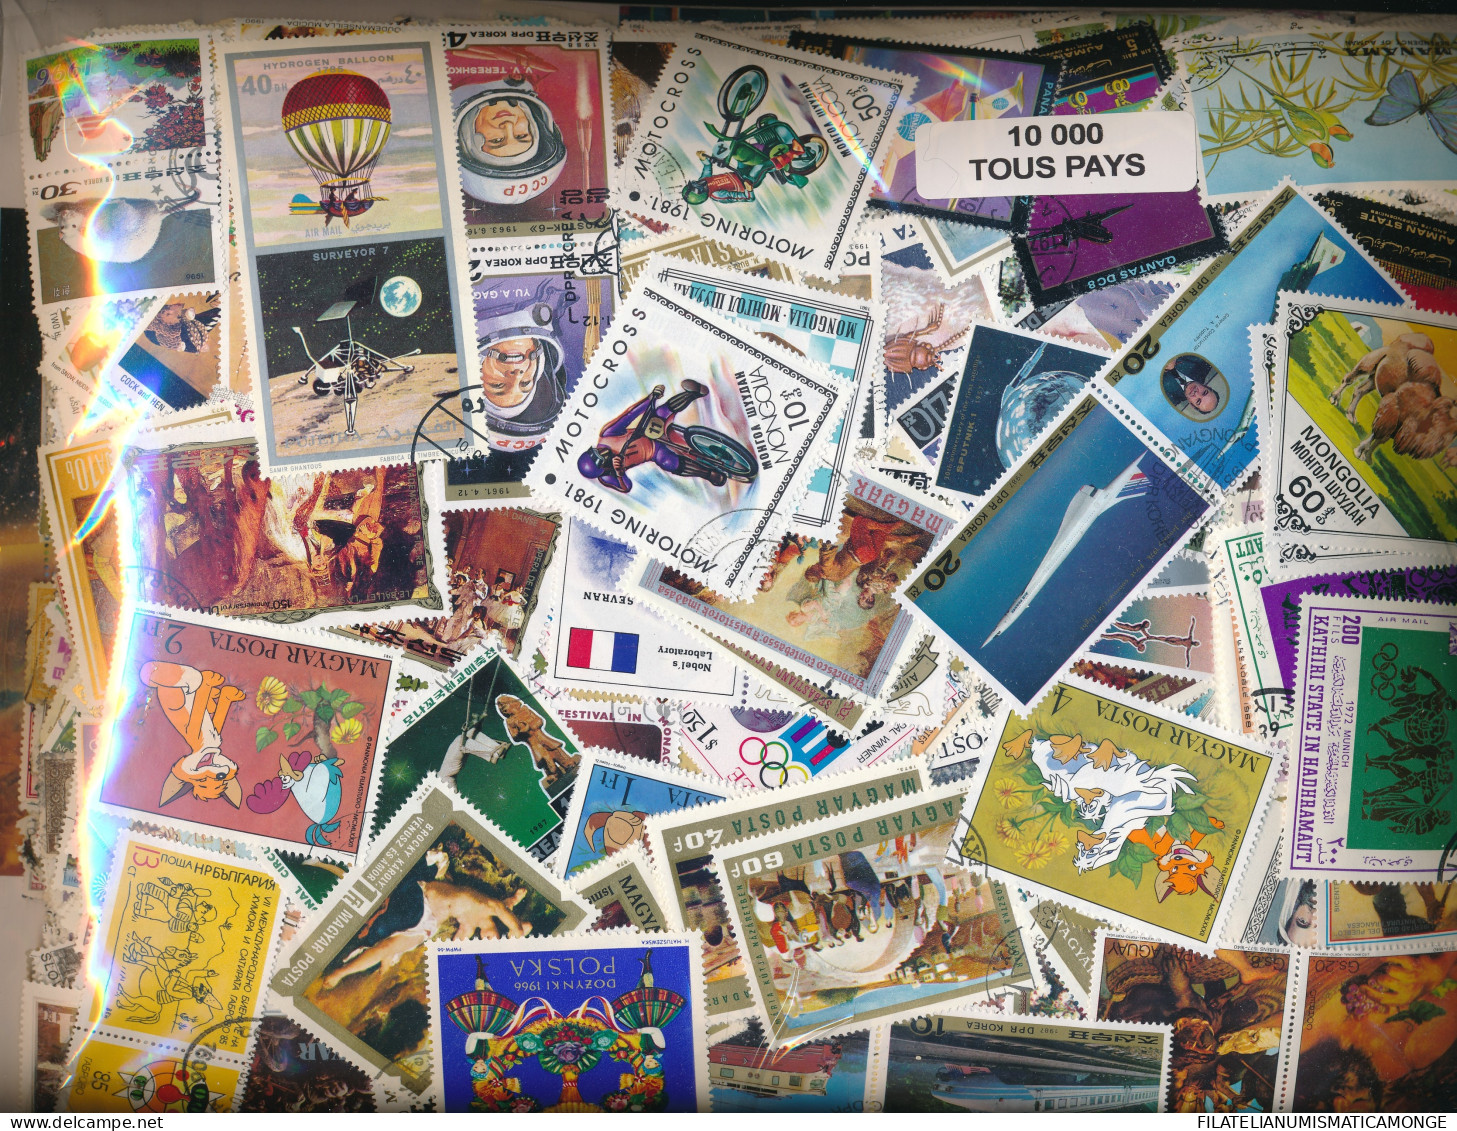  Offer - Lot Stamps - Paqueteria  Mundial 10000 Diferentes / Foto Generica      - Vrac (min 1000 Timbres)